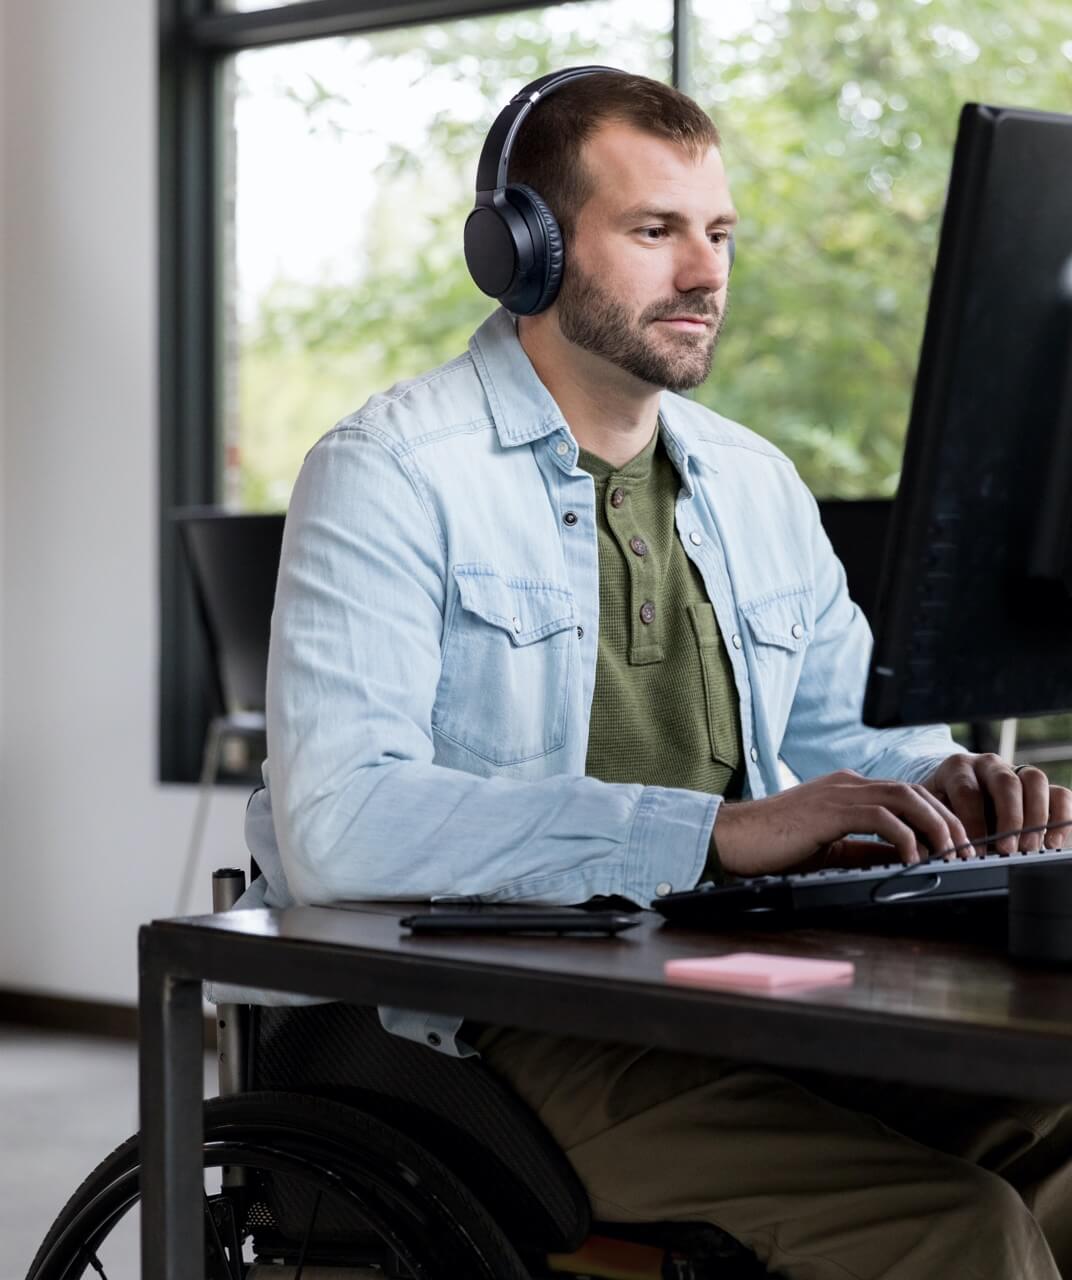 Man in a wheelchair sat working at his computer. He has a beard and is wearing headphones. He is typing at the keyboard and appears to be working in an office.